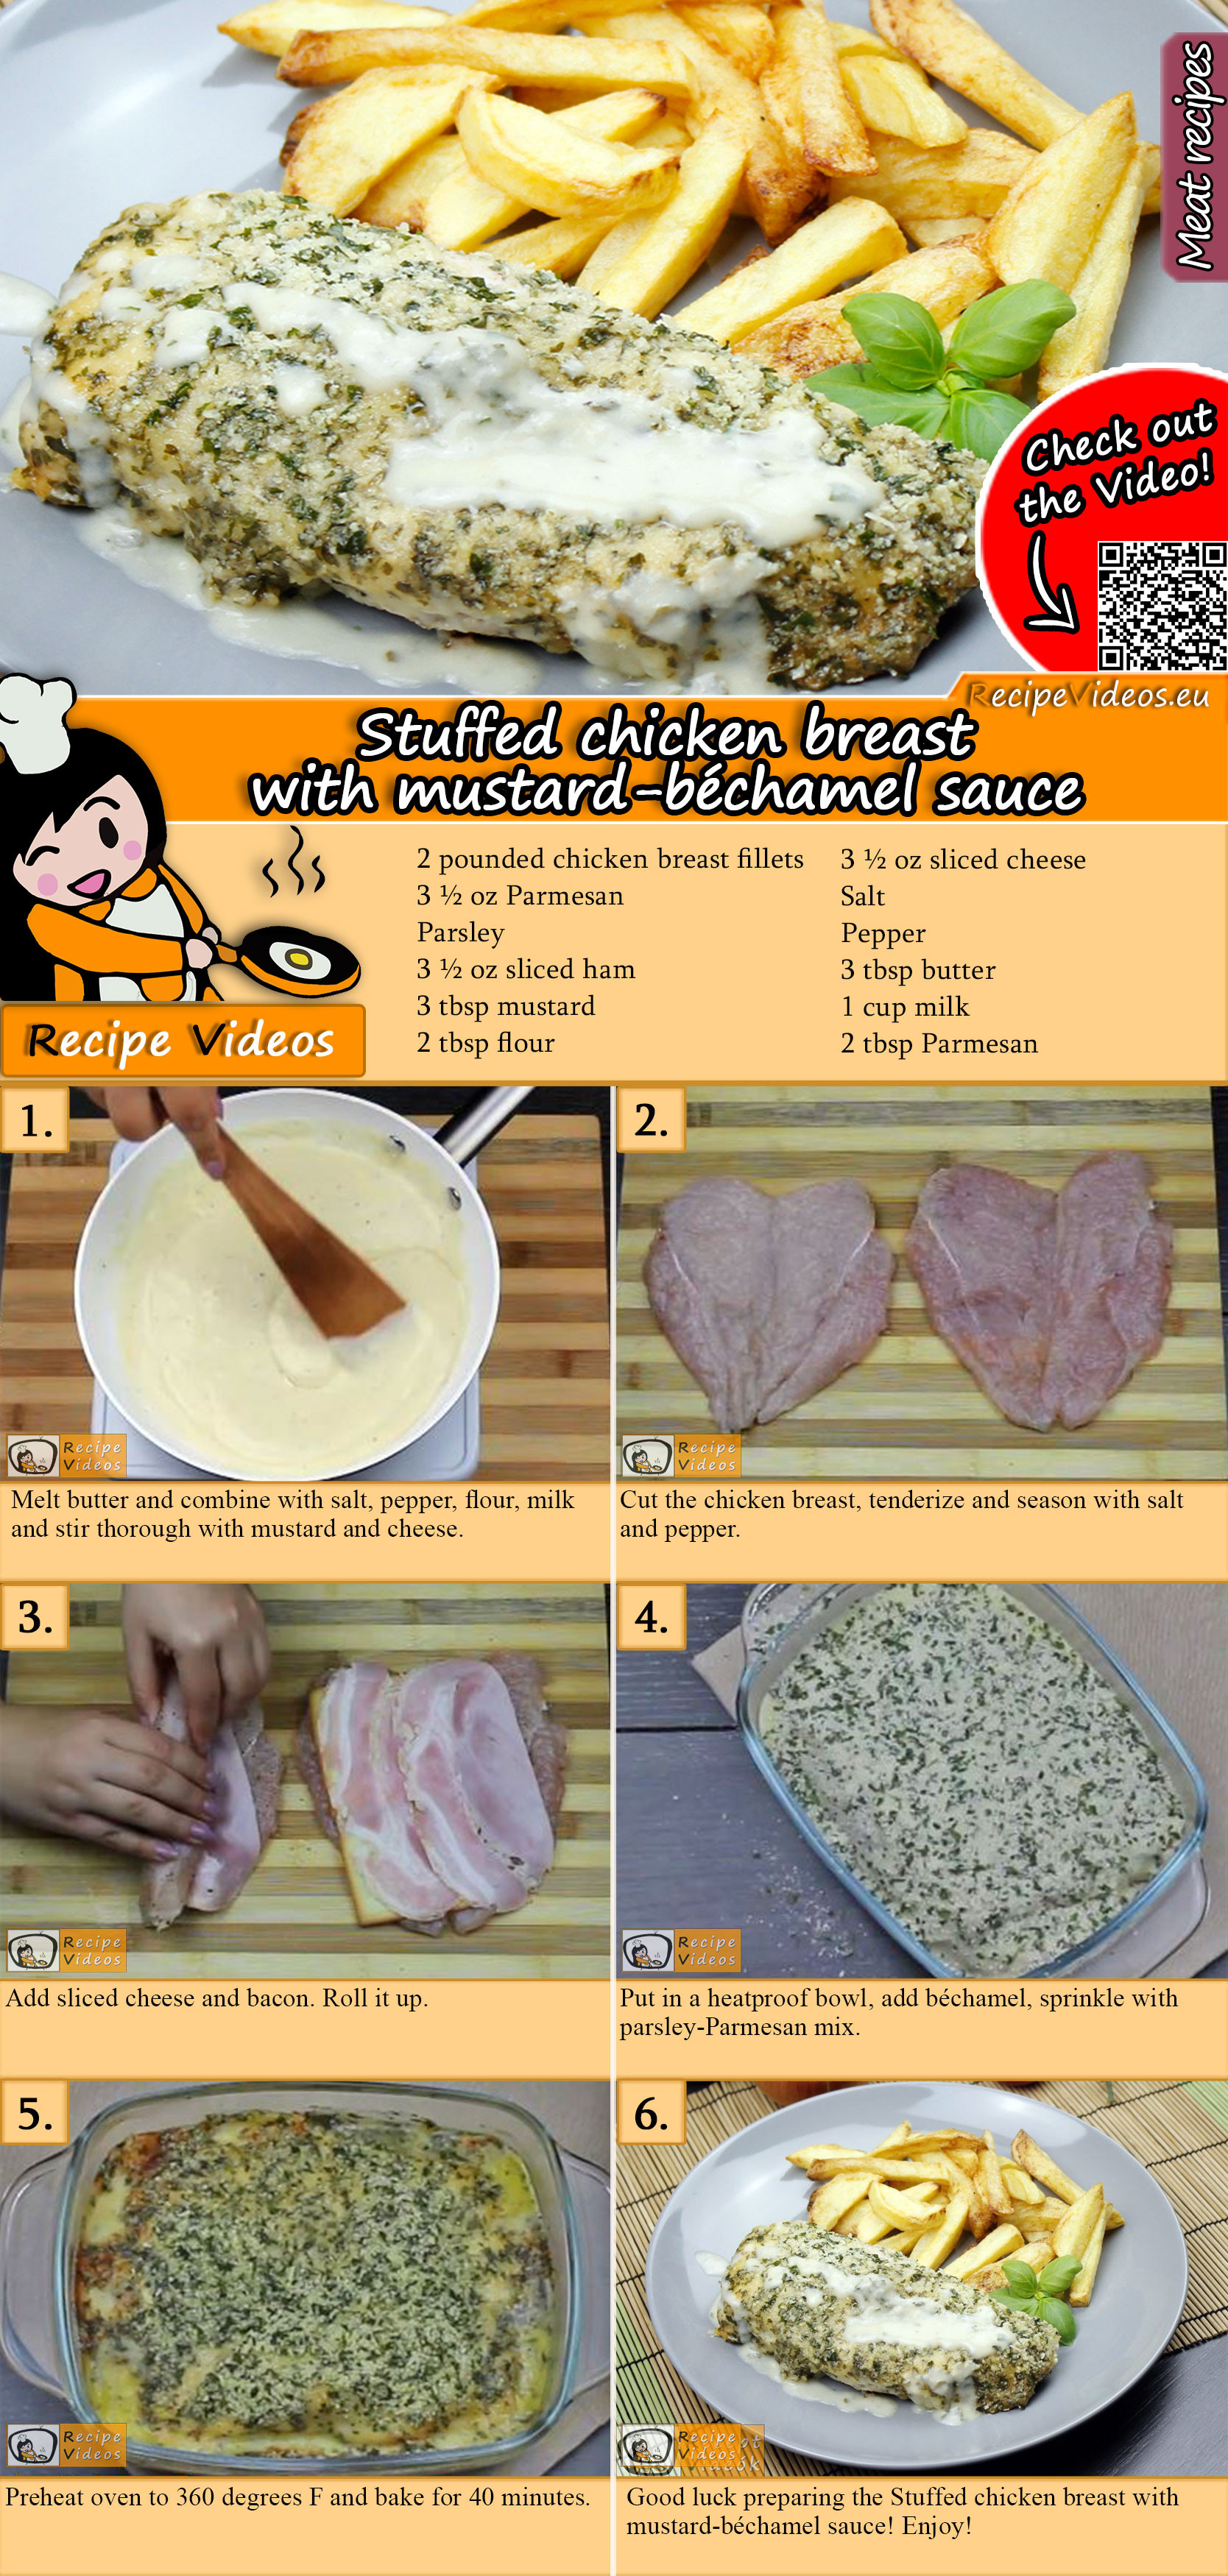 Stuffed chicken breast with mustard-béchamel sauce recipe with video